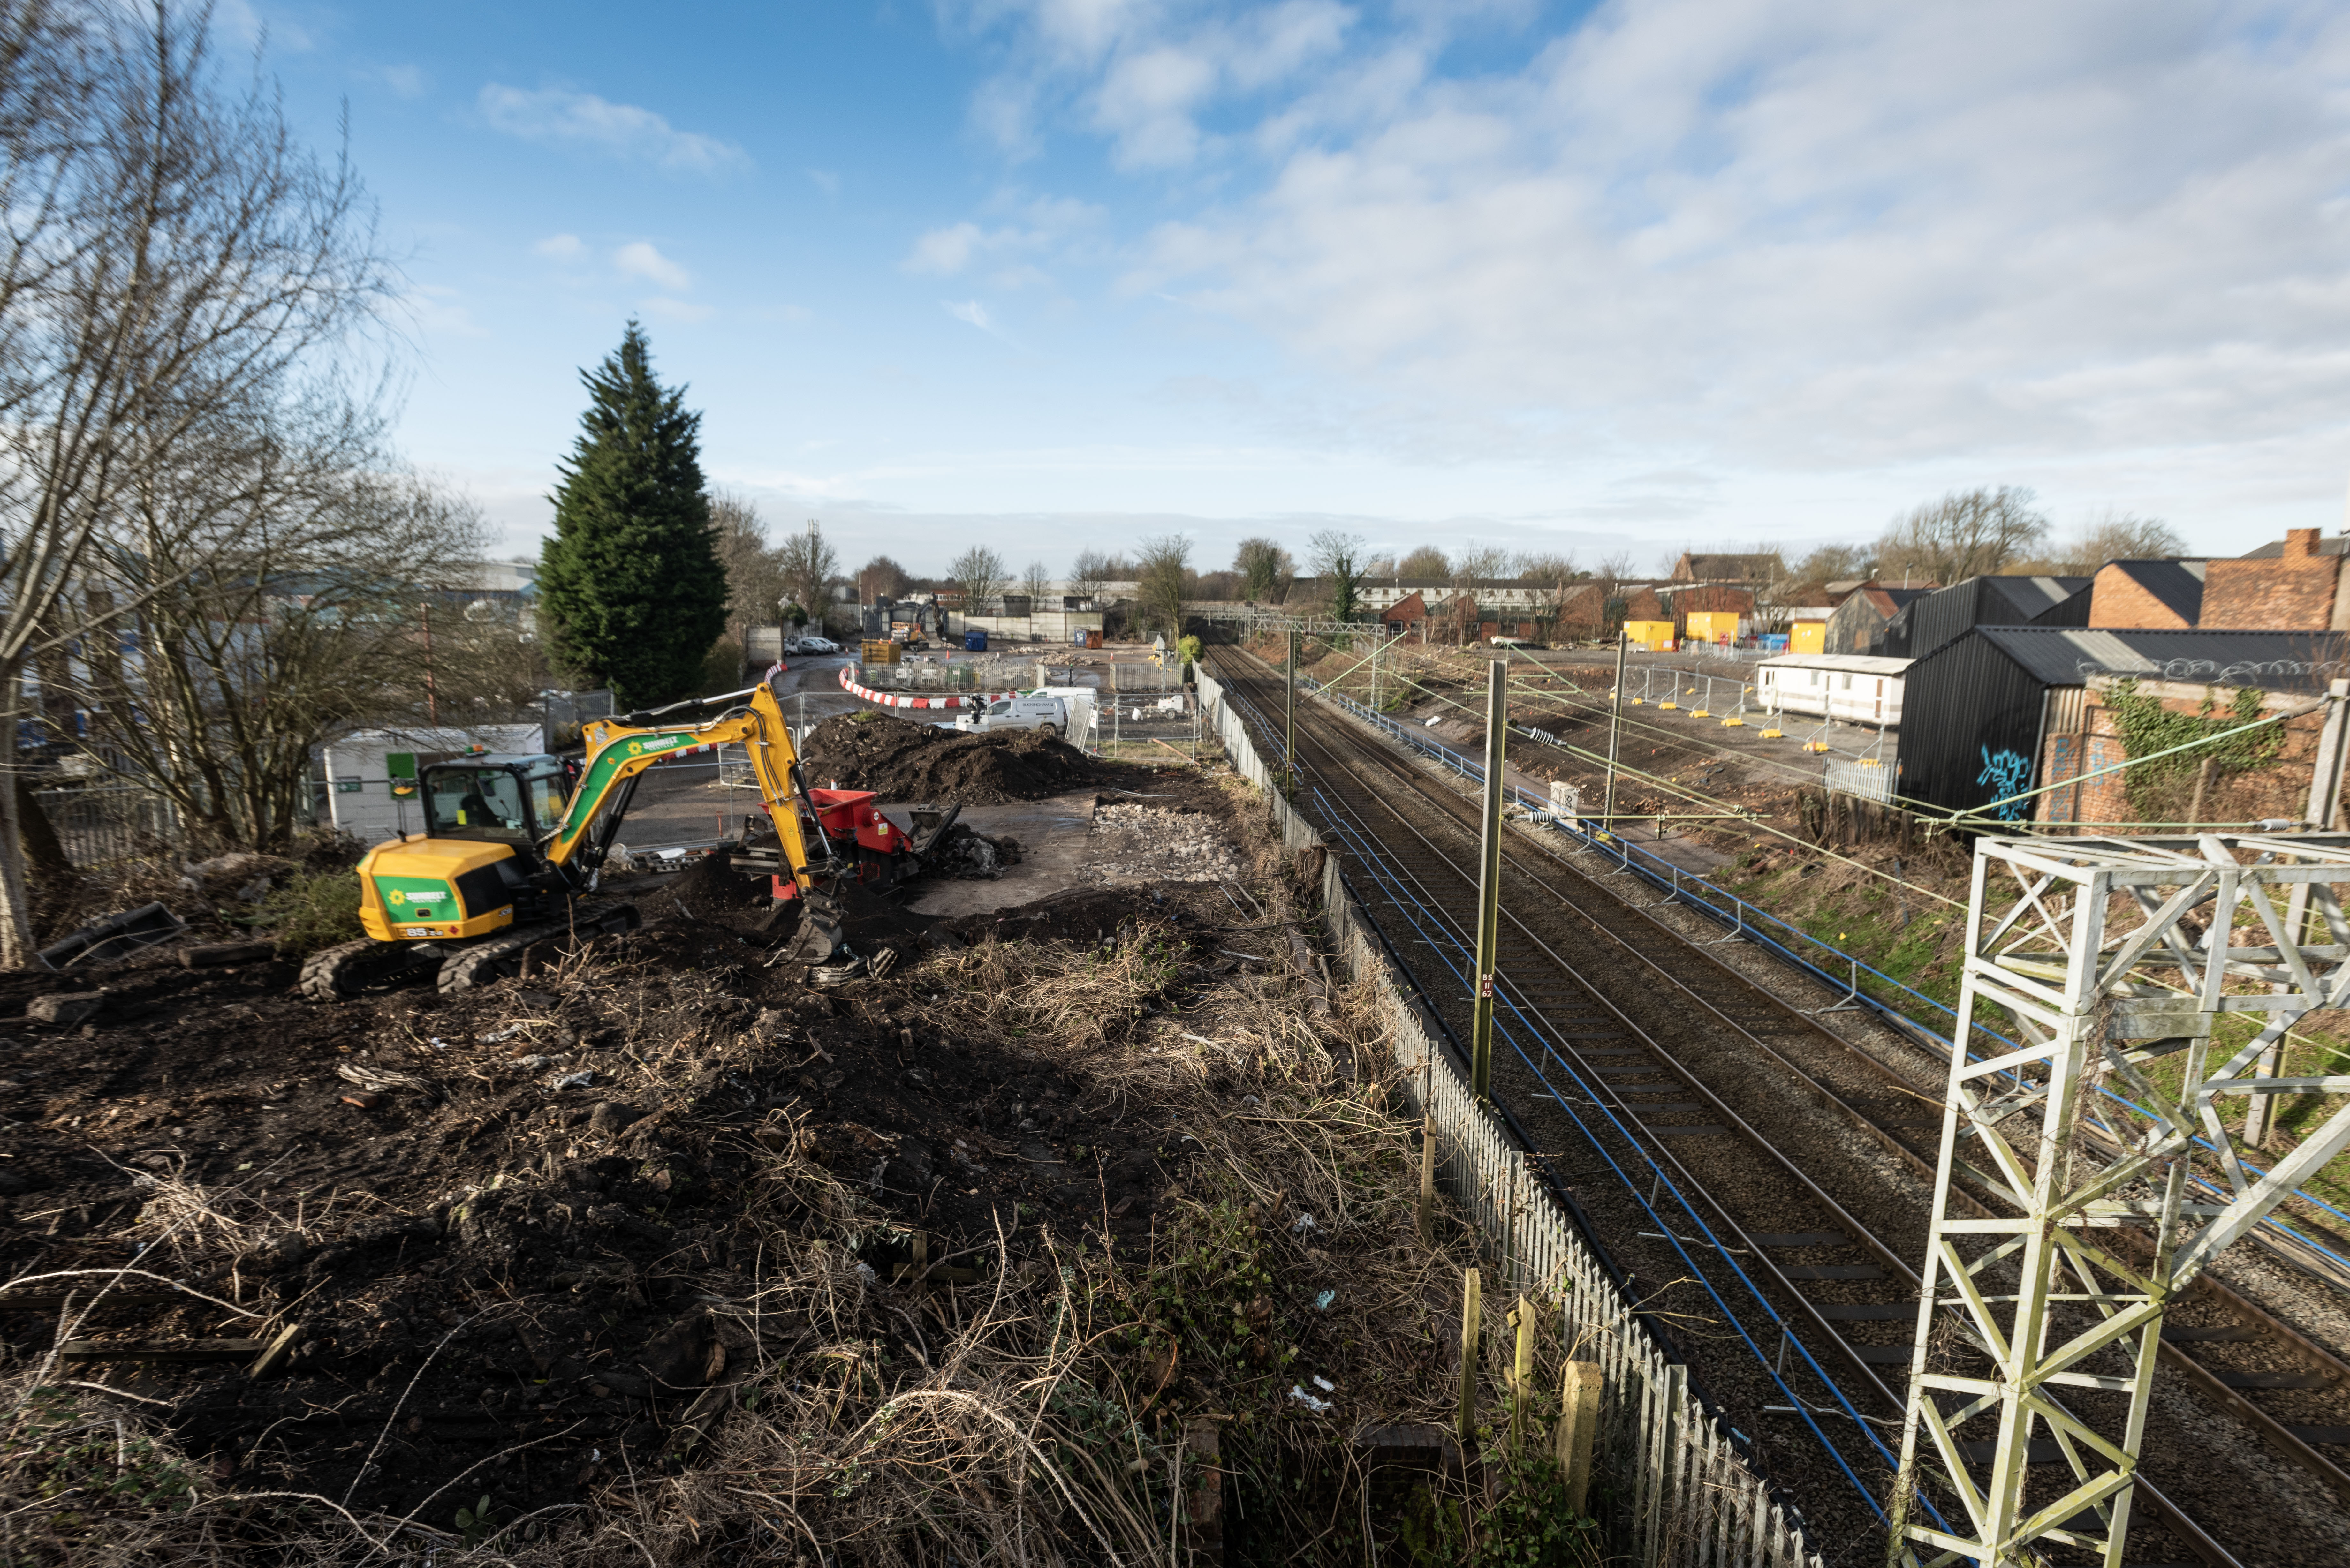 The Willenhall station site